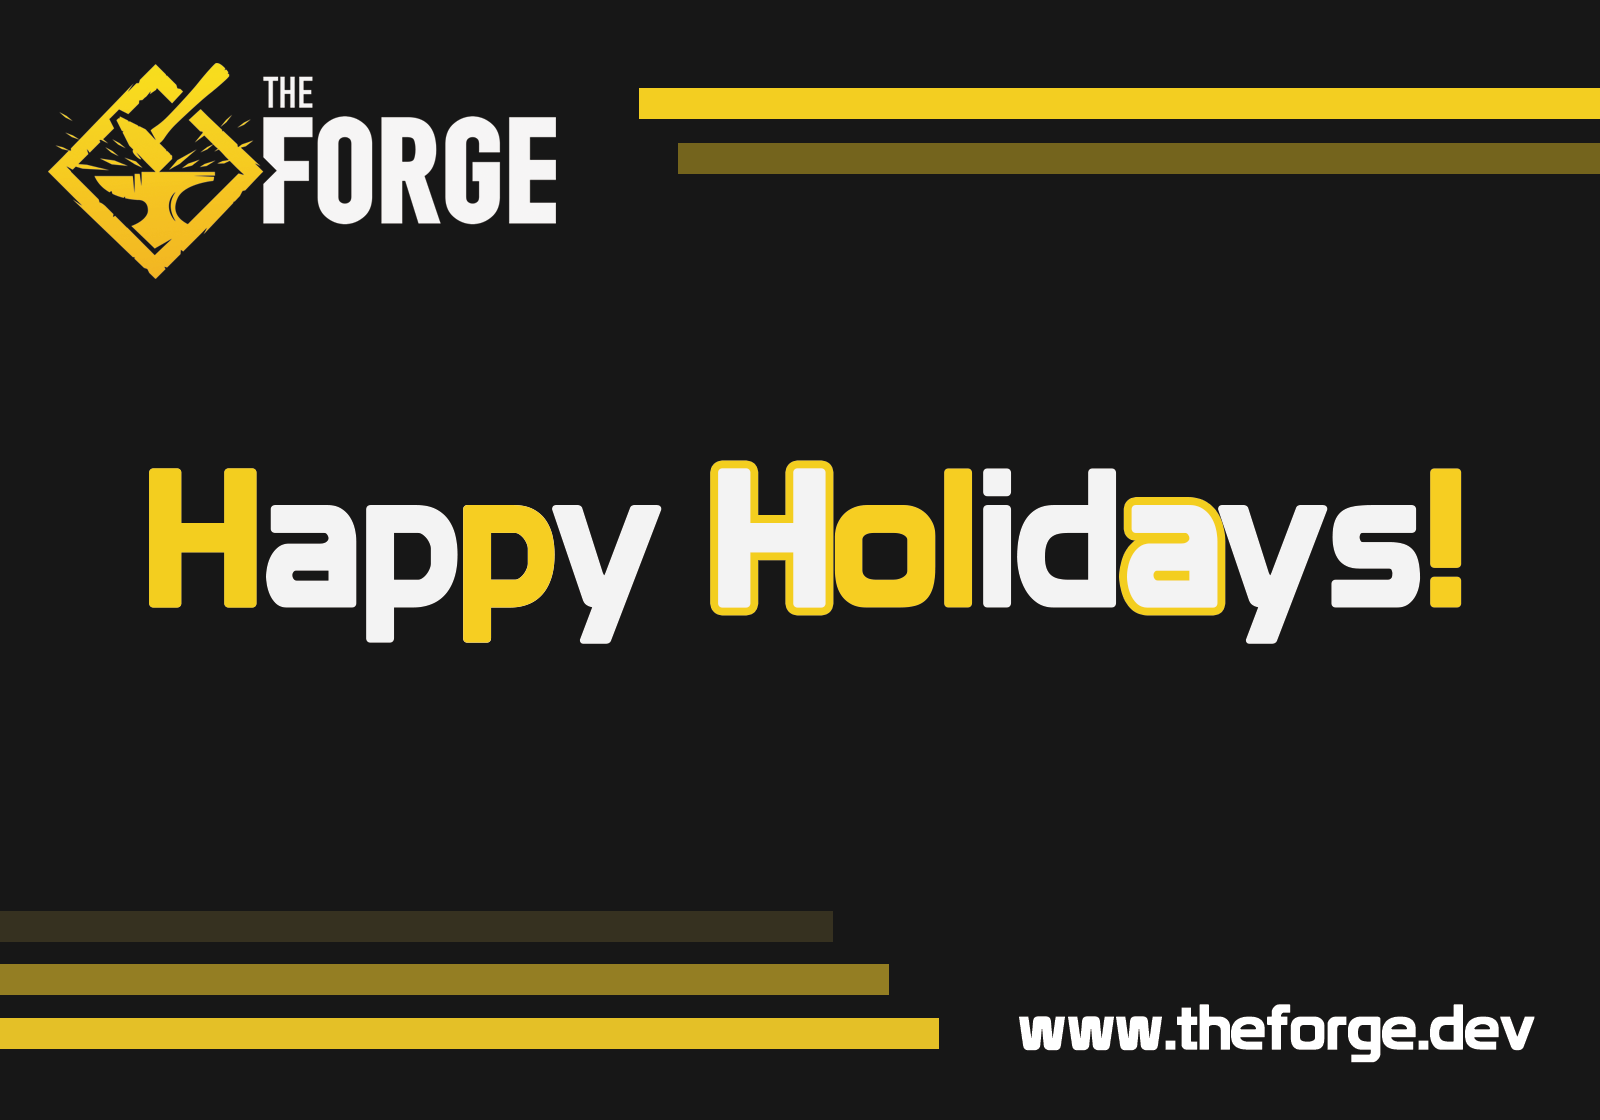 Happy Holidays and a happy new Year!